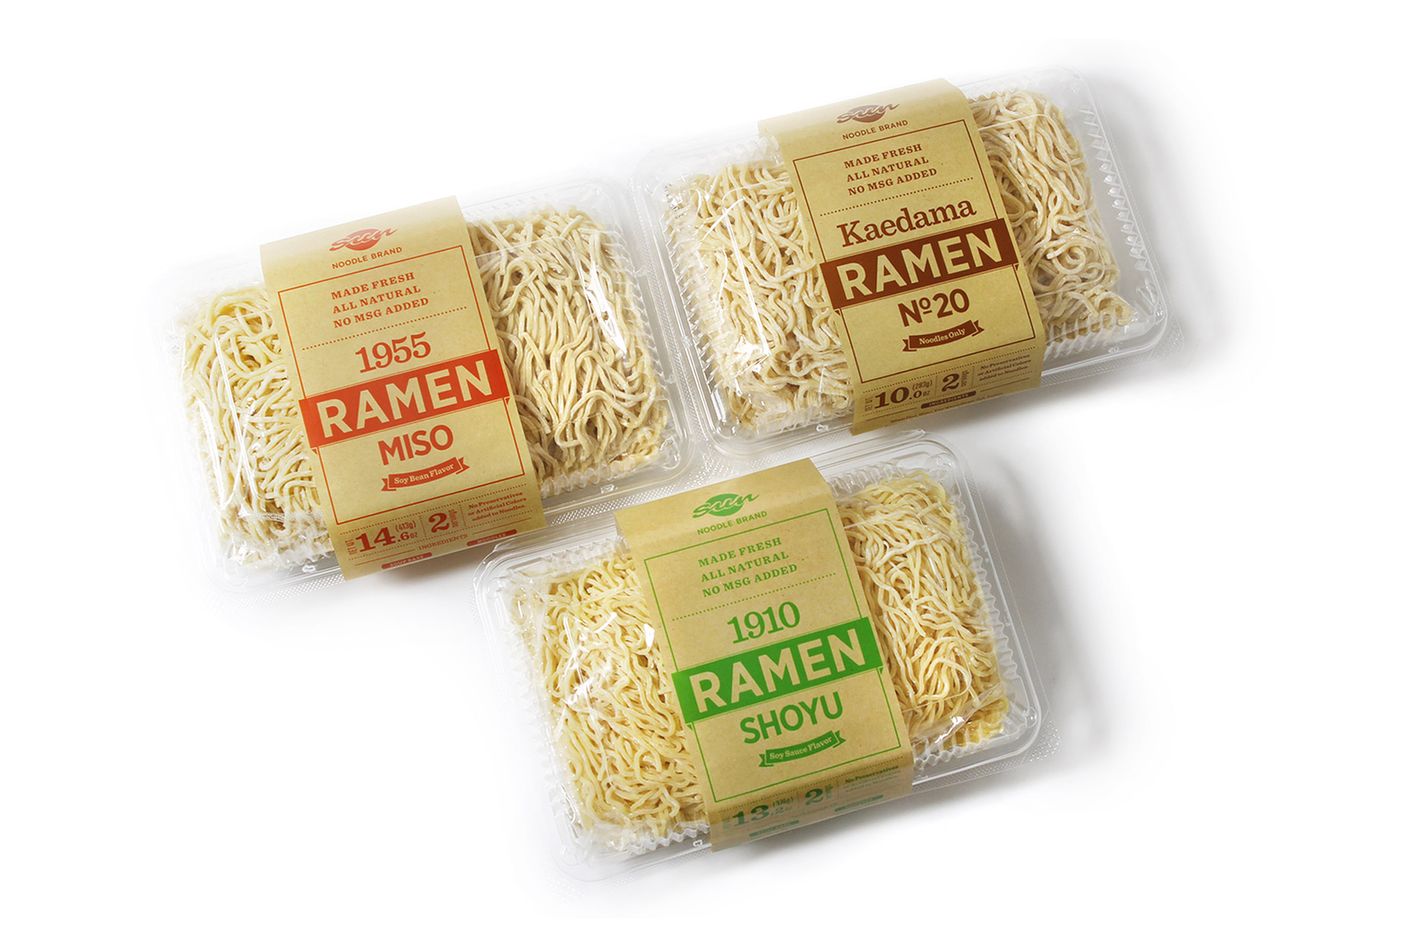 What Do College Students Think of Whole Foods' New Fresh Ramen Kits?